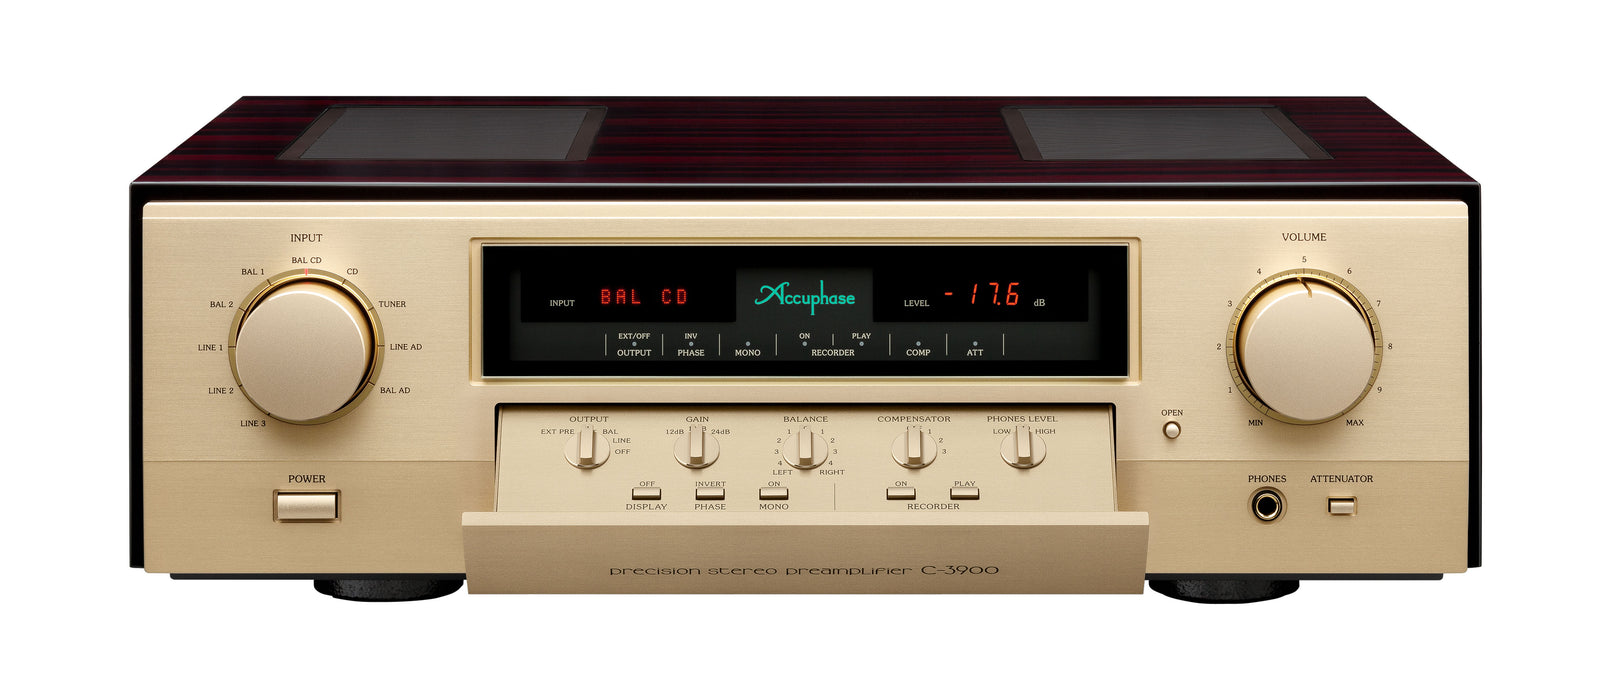 Accuphase C-3900 Precision Stereo Preamplifier - Safe and Sound HQ